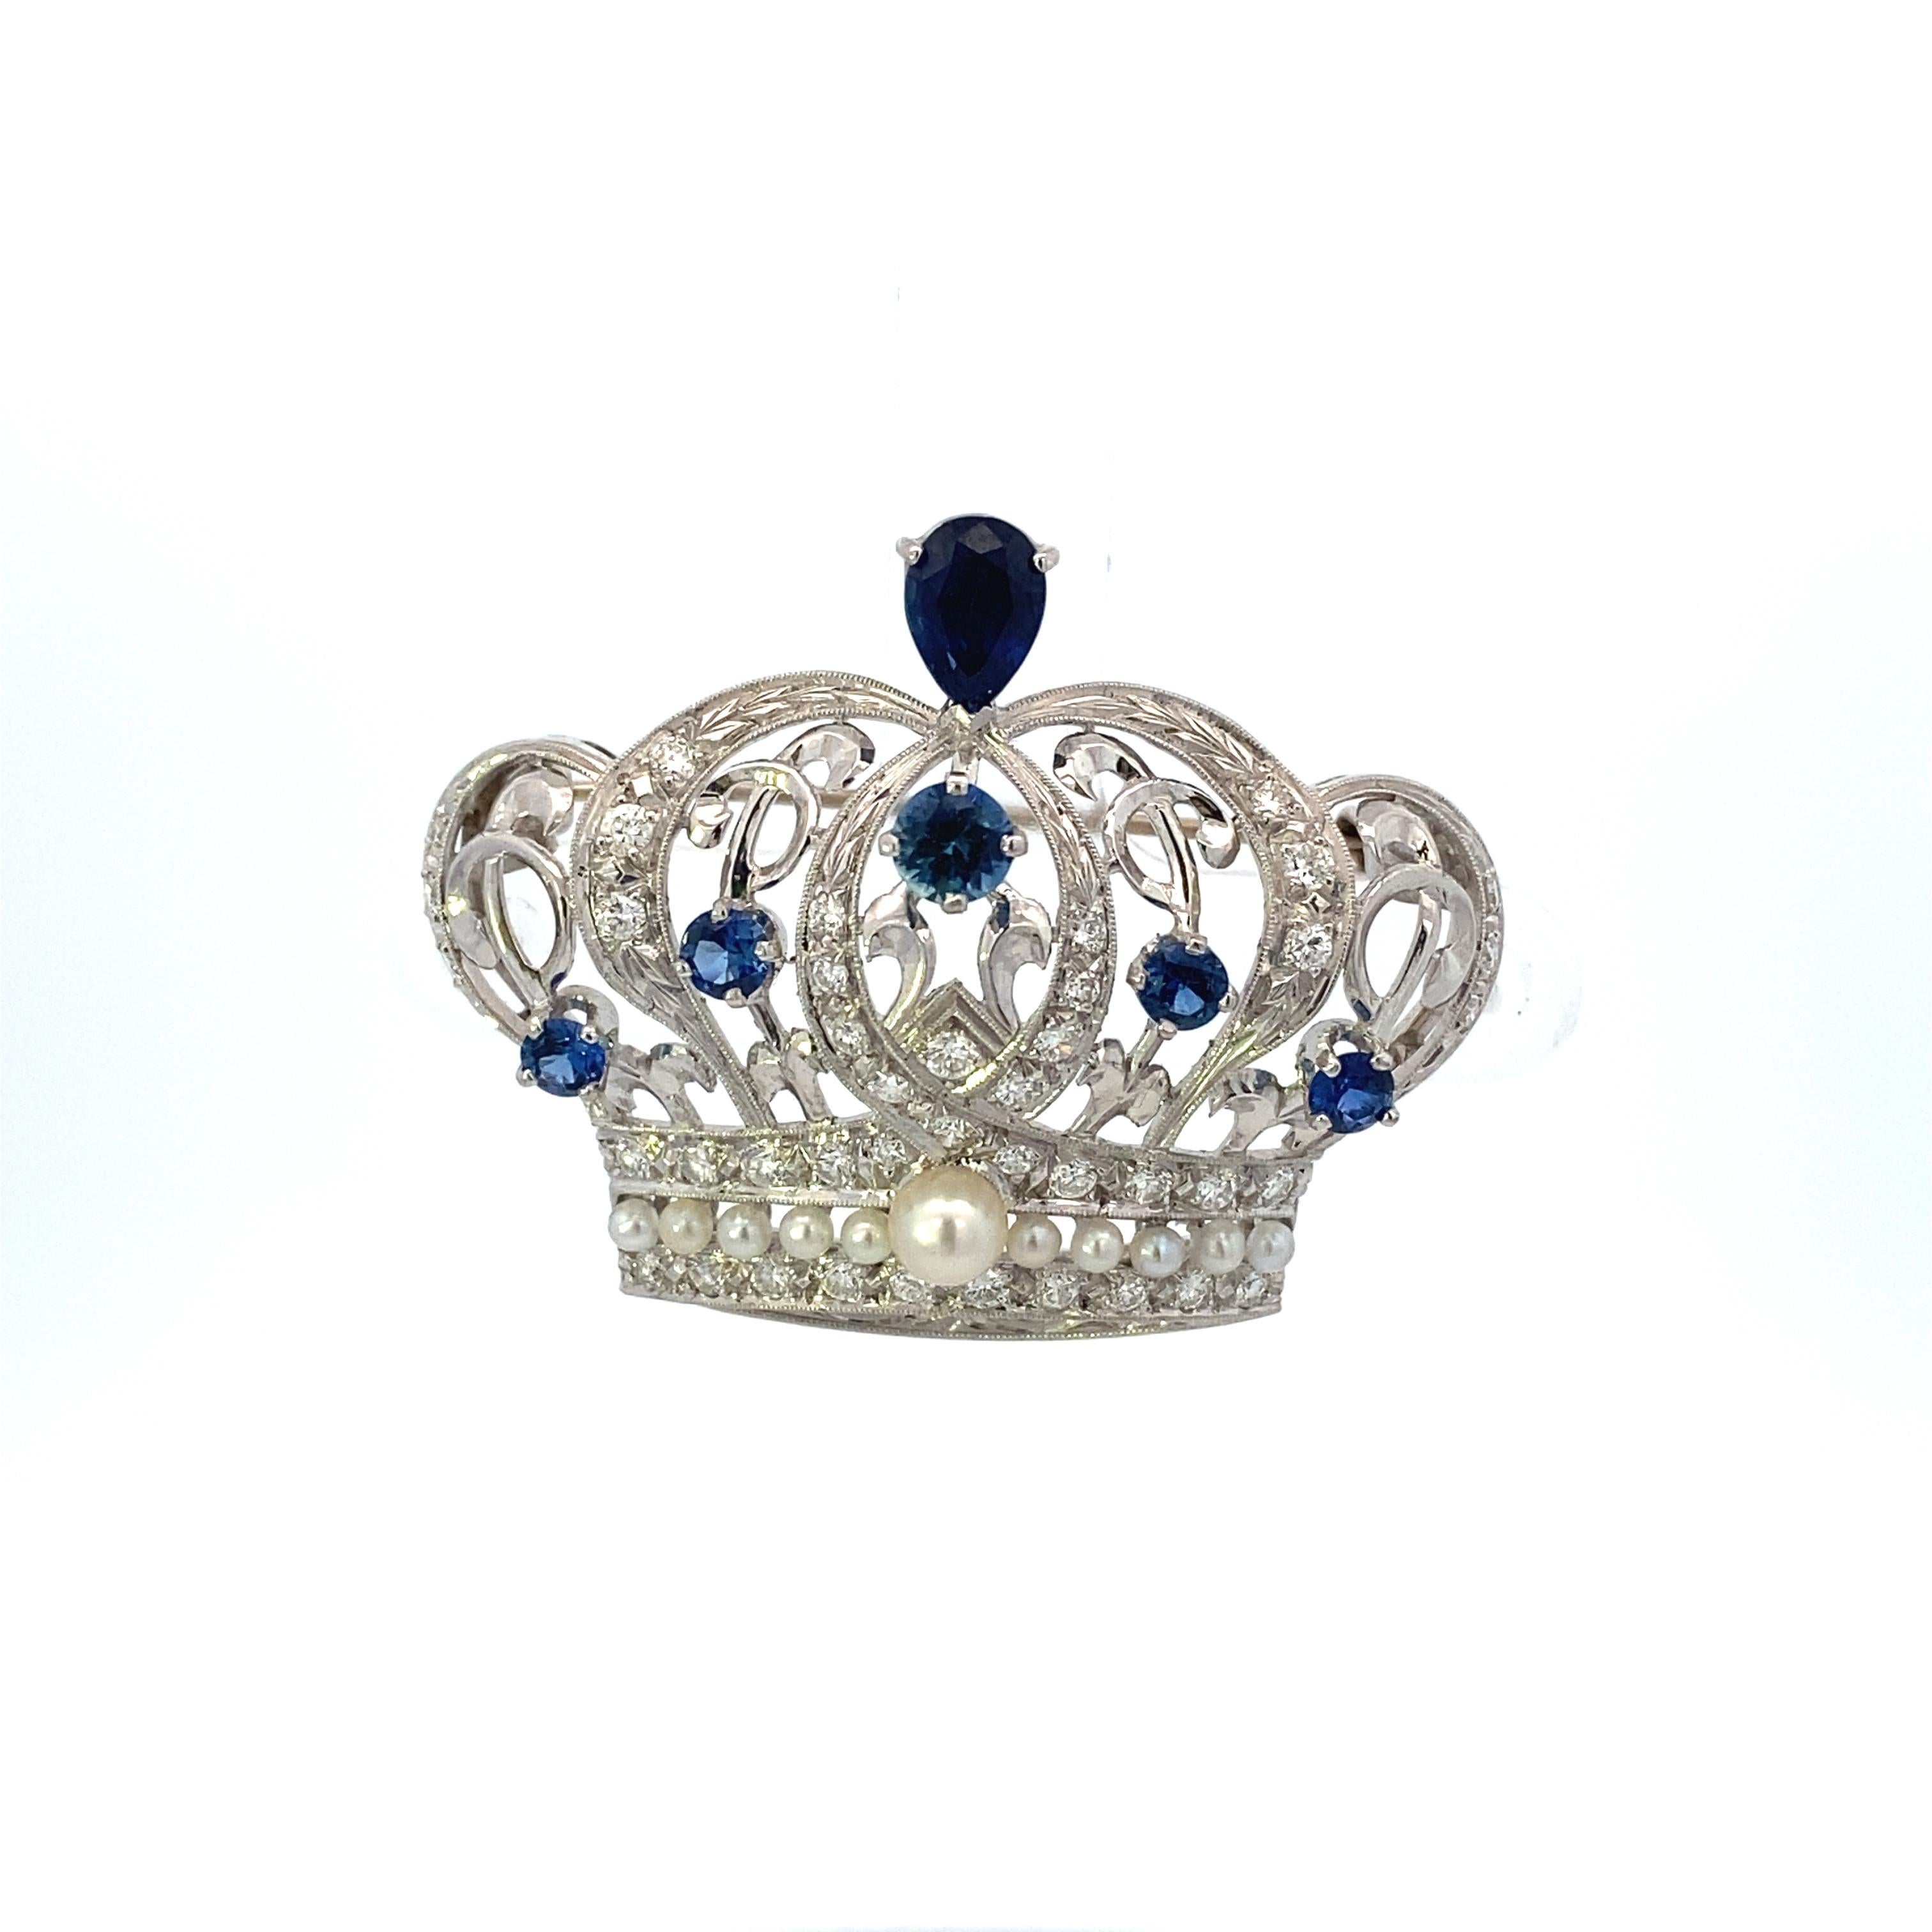 Edwardian-Styled Platinum Crown Brooch with Sapphires, Diamonds and Pearls 2